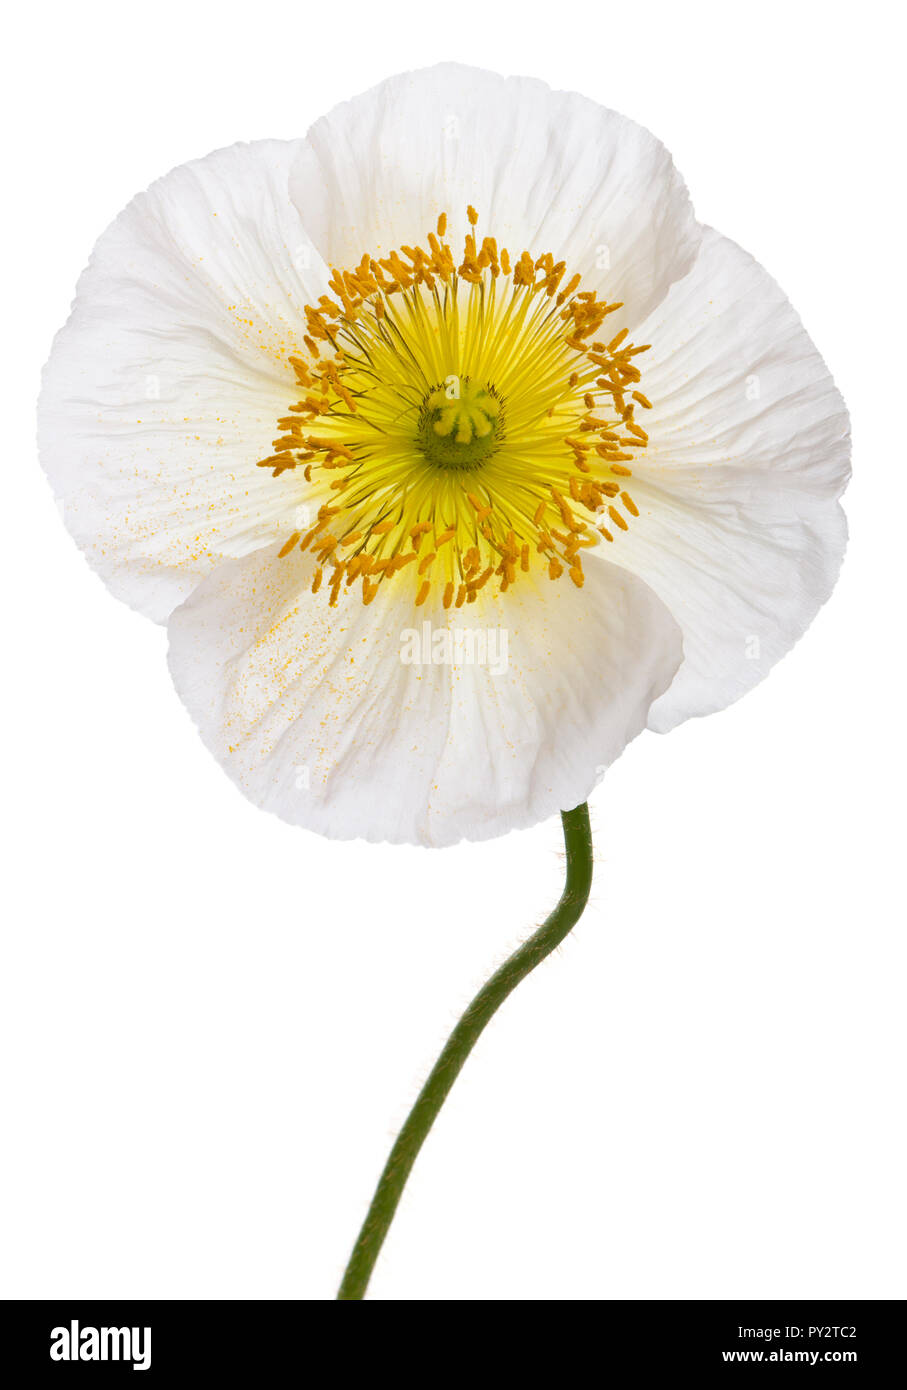 Close-up of White Alpine poppy, Papaver alpinum, in front of white background Stock Photo